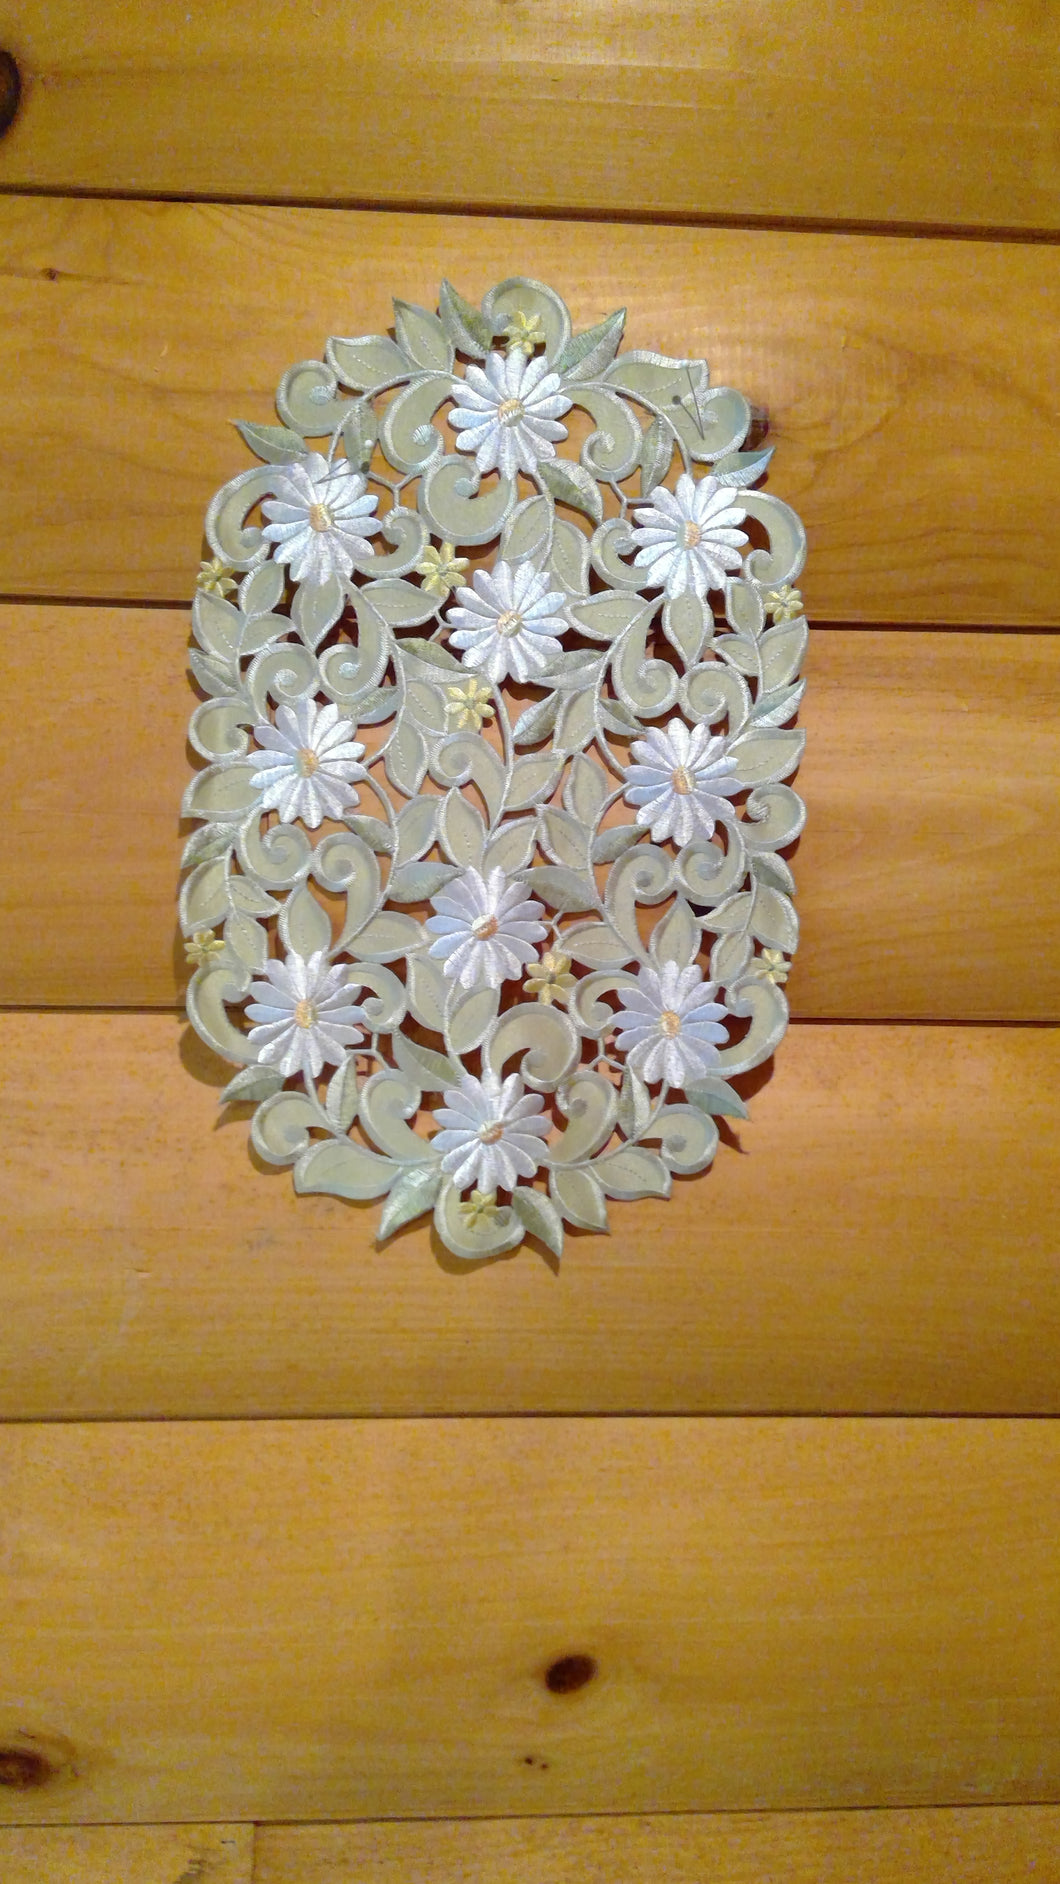 12 x 18 Oval Table Accent White Daisy Sage Green Pattern